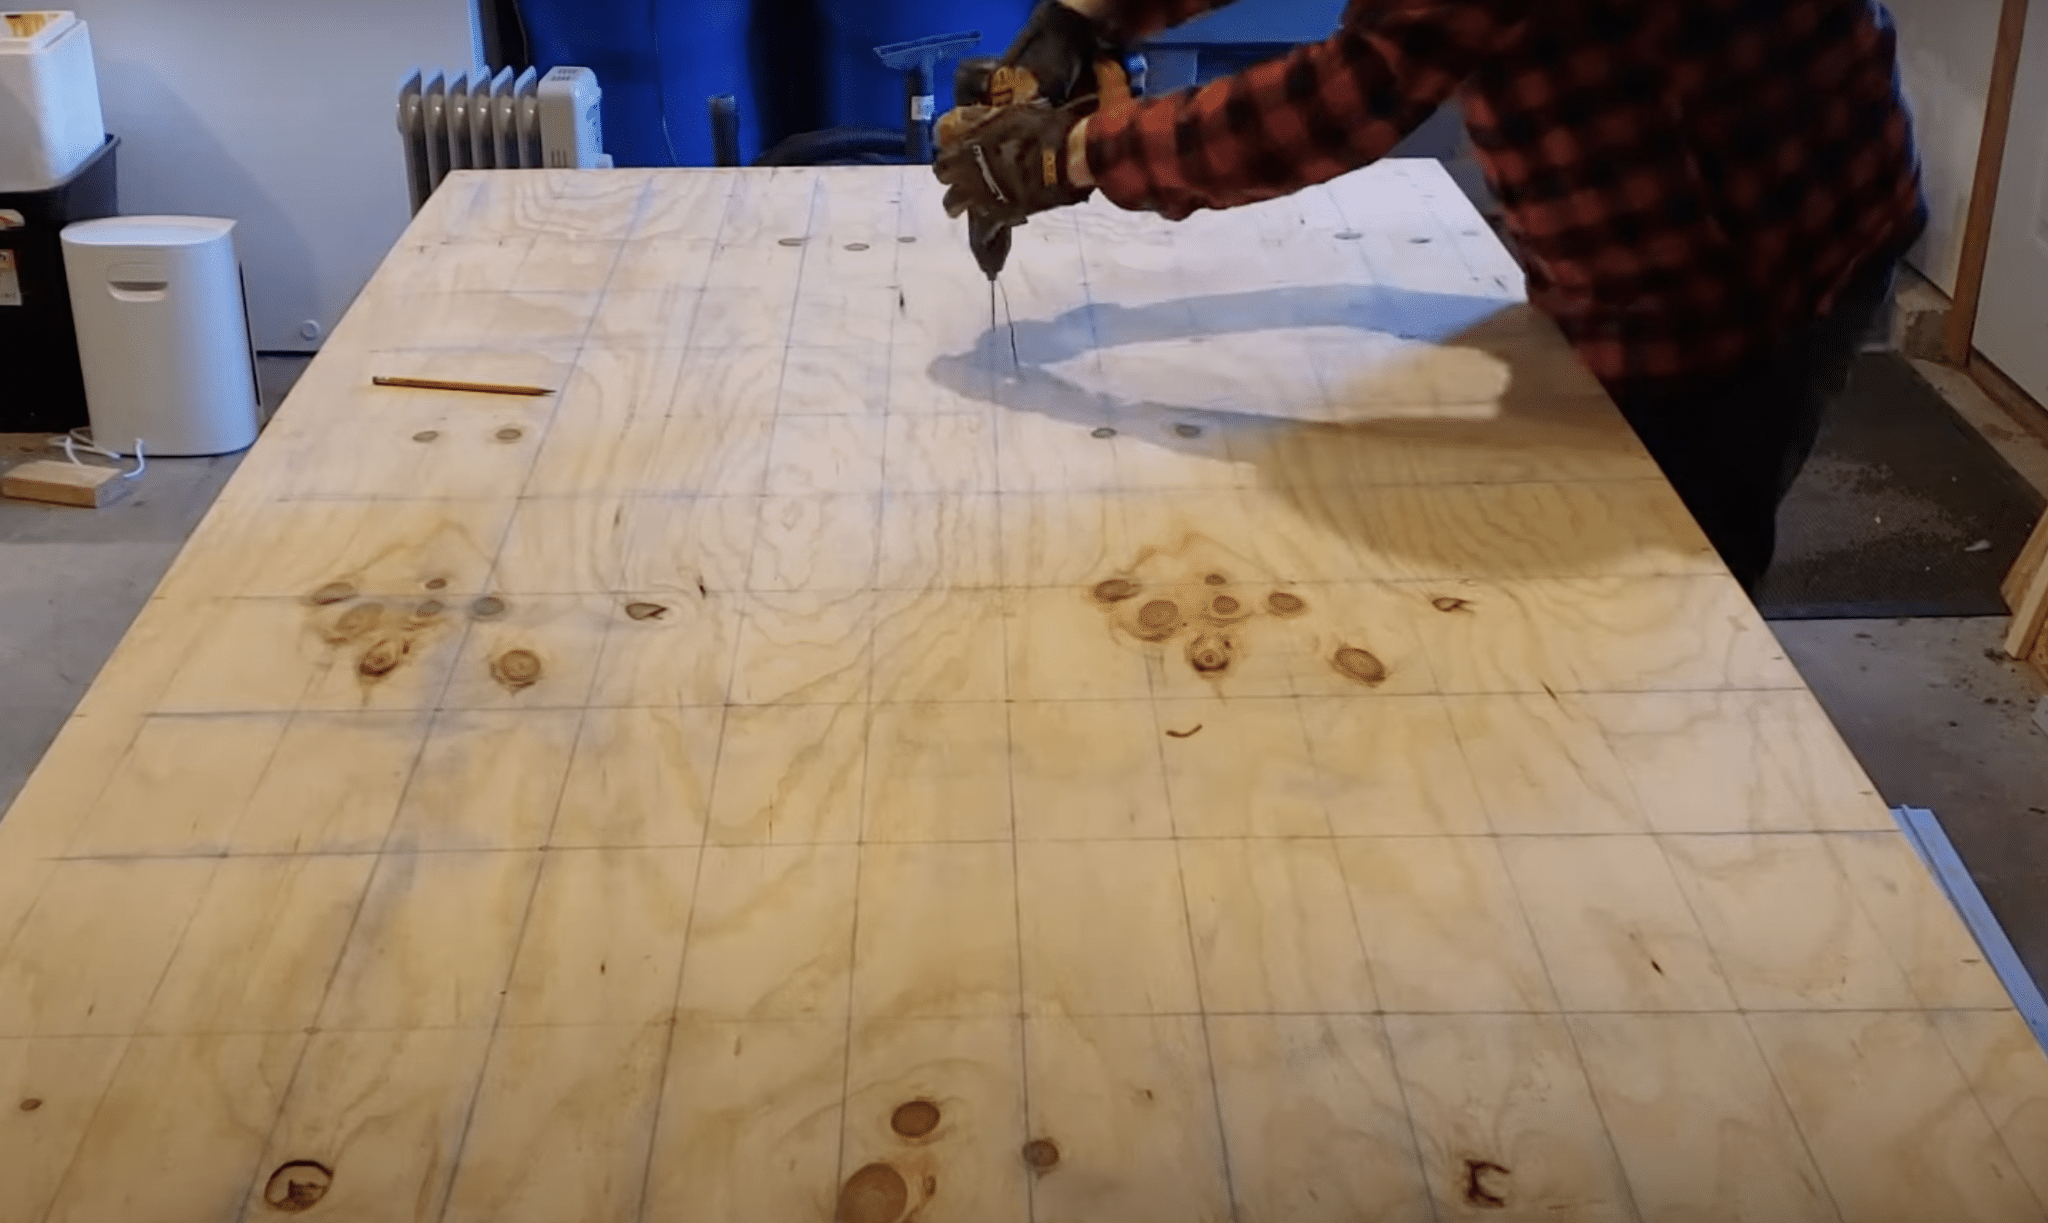 Drilling the Plywood